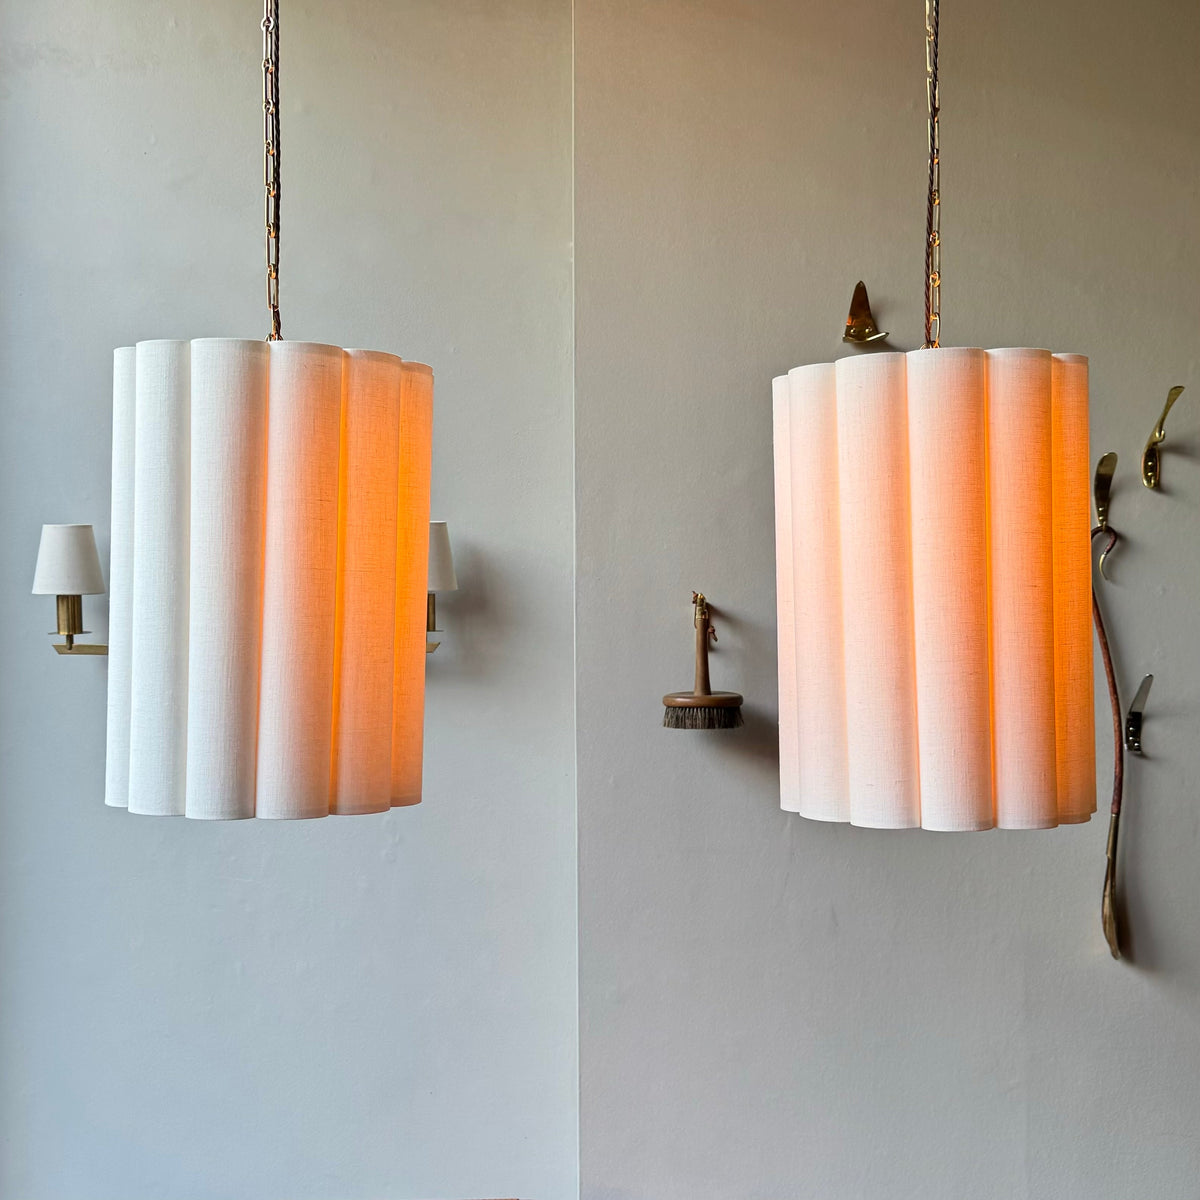 Large Scalloped Pendant Light/ Italy, 1960s (2 of 2)